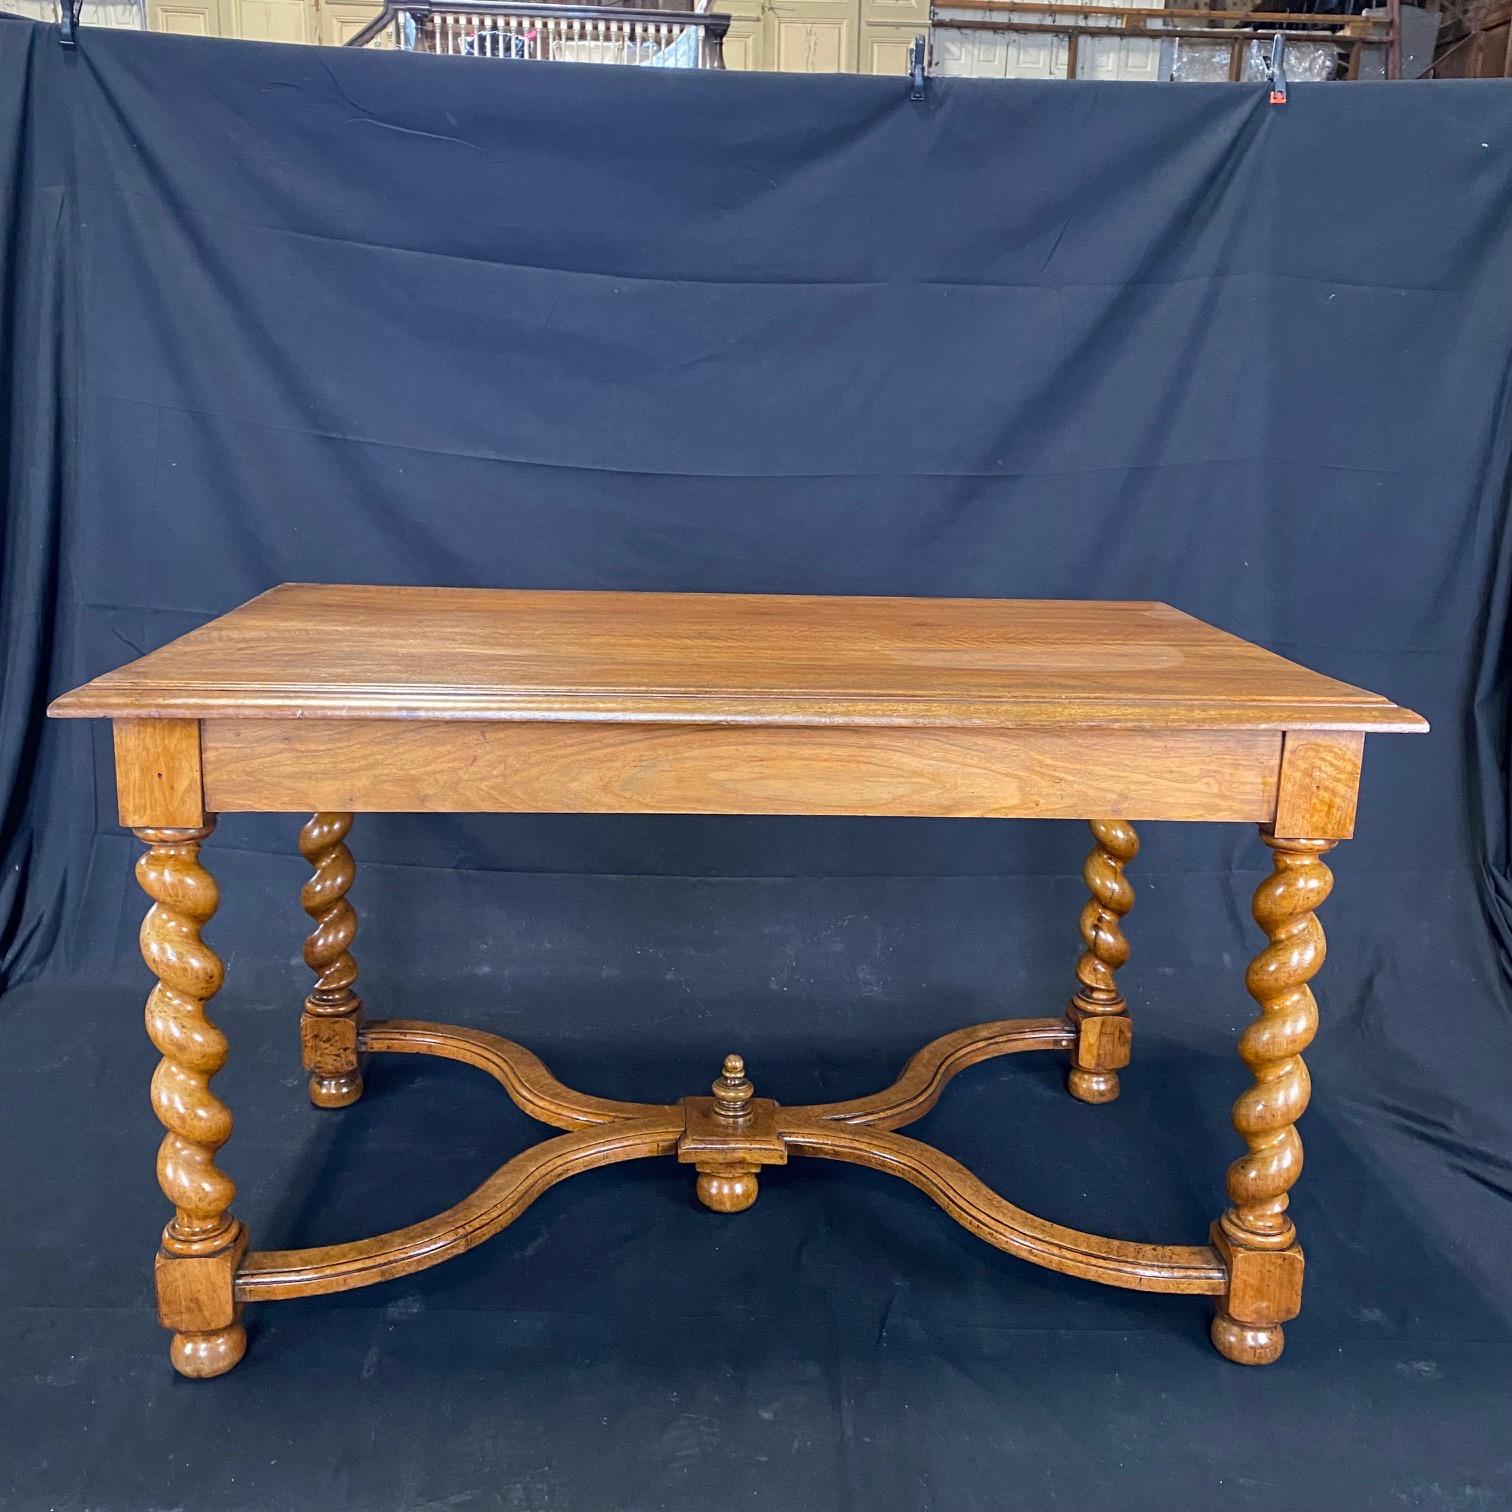 Stunning 19th Century Walnut French Barley Twist Center or Dining Table For Sale 4